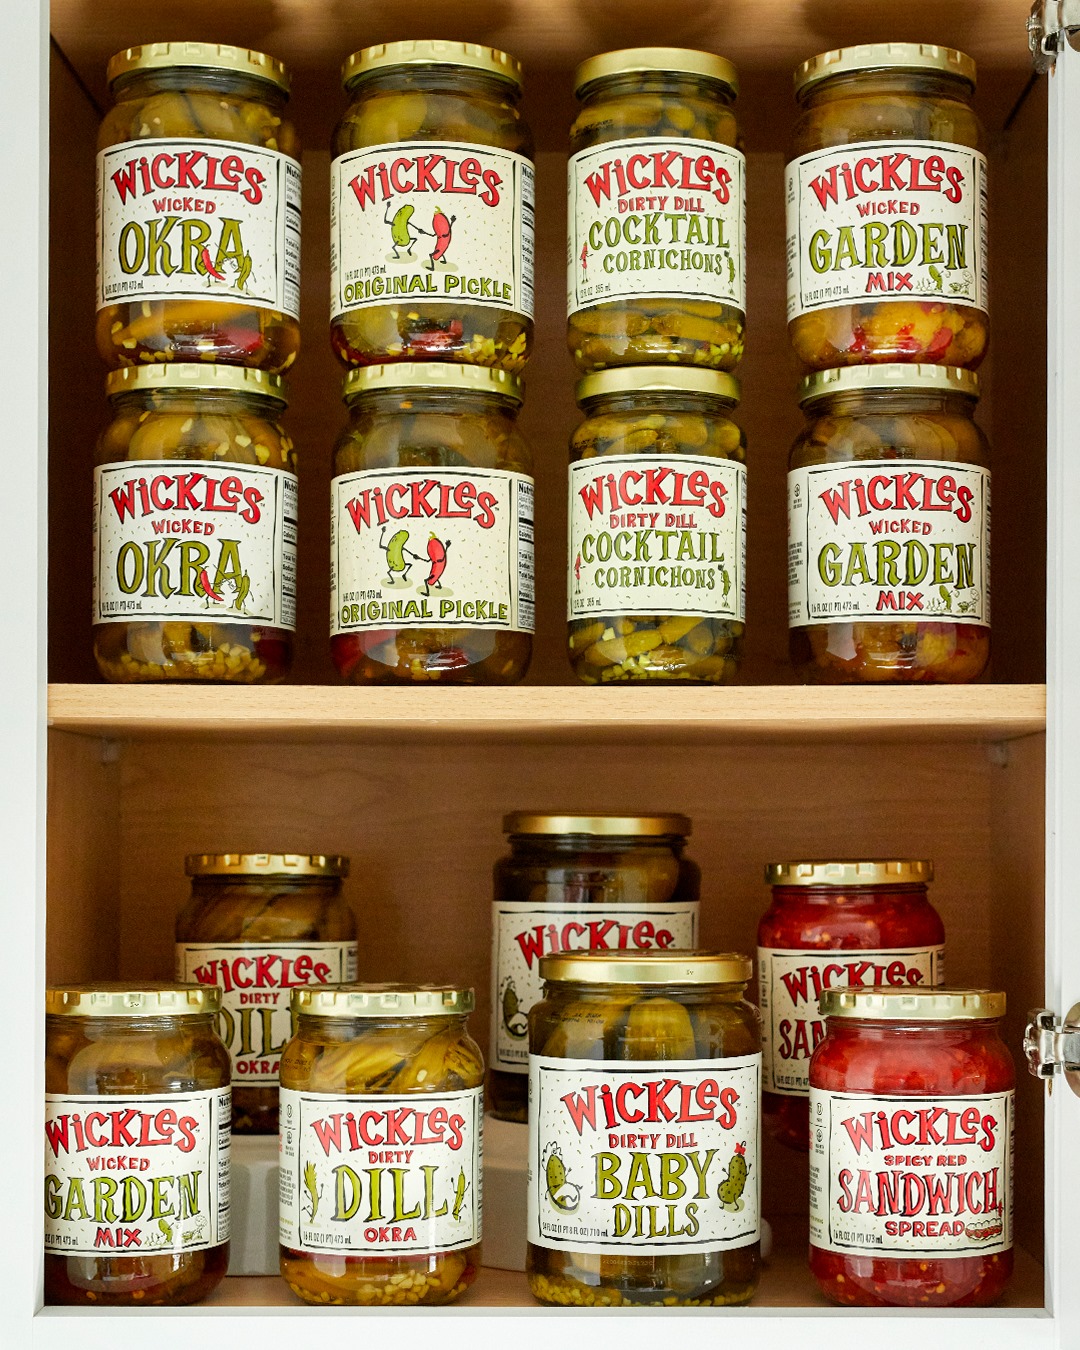 15 things you might not know about Wickles Pickles 